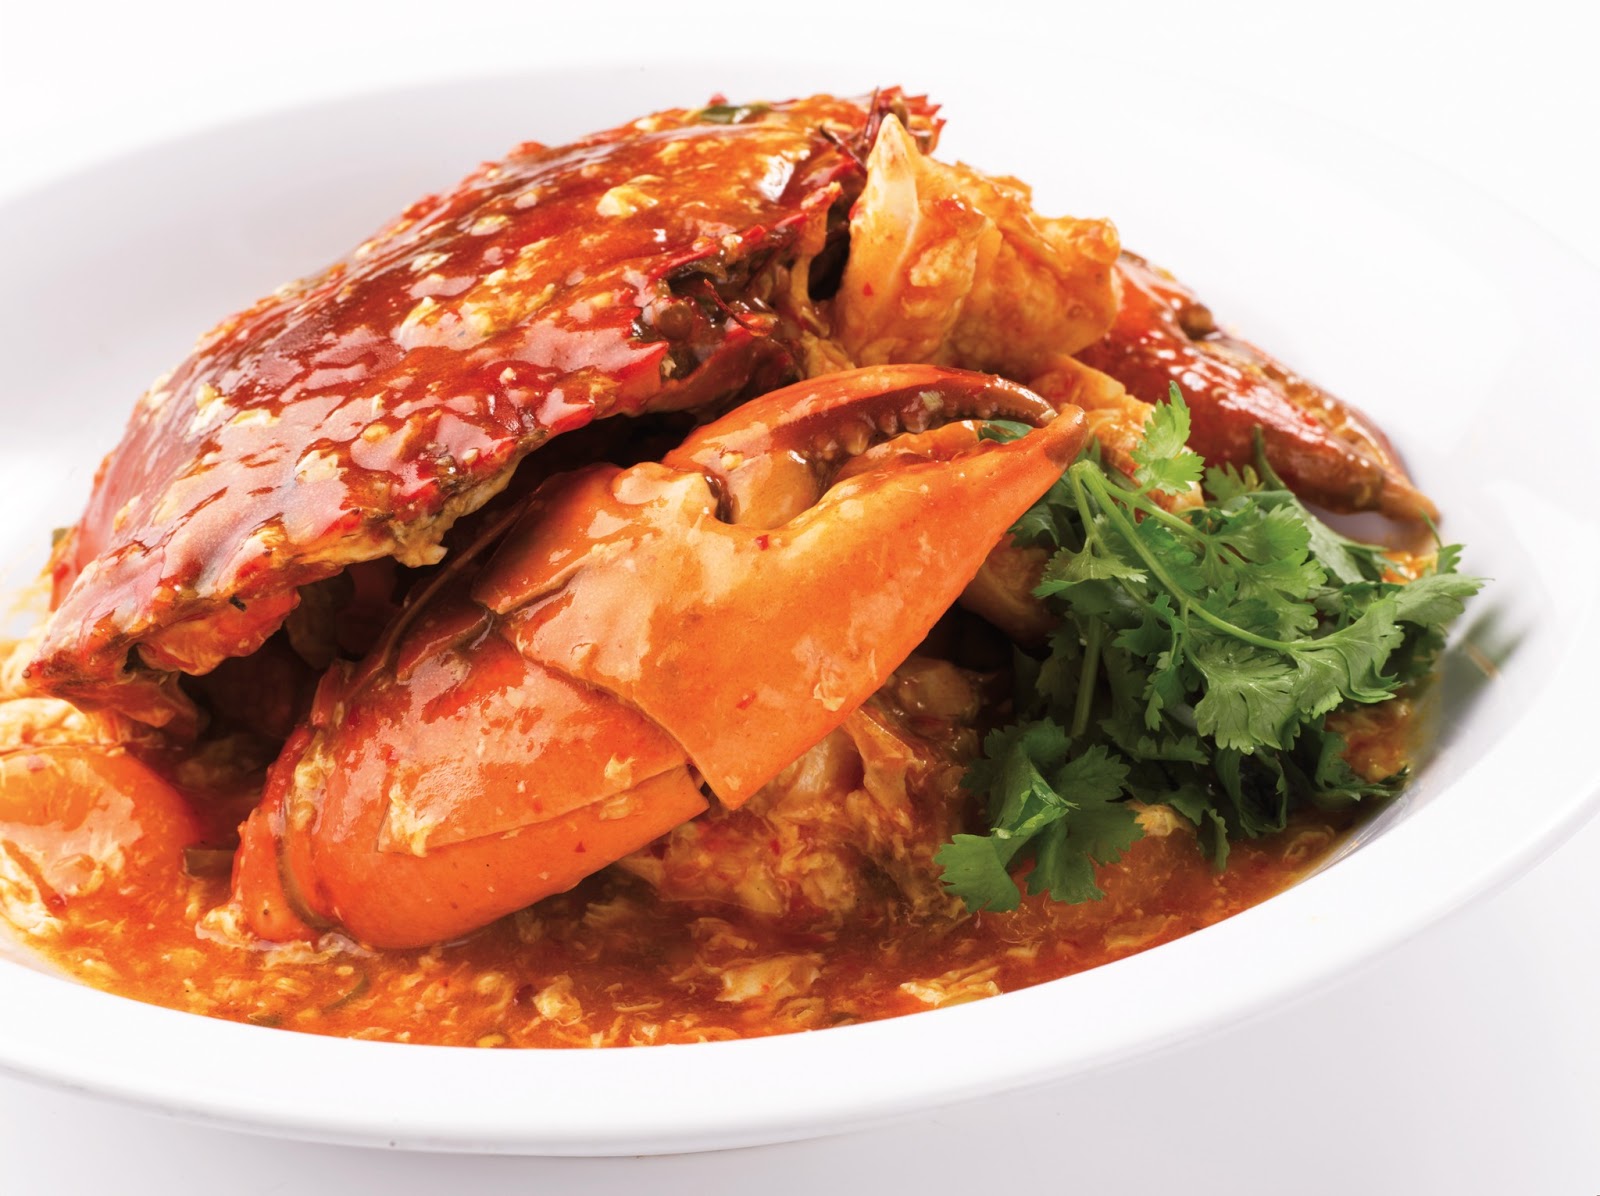 gastronommy.com: Best Crabs in Singapore